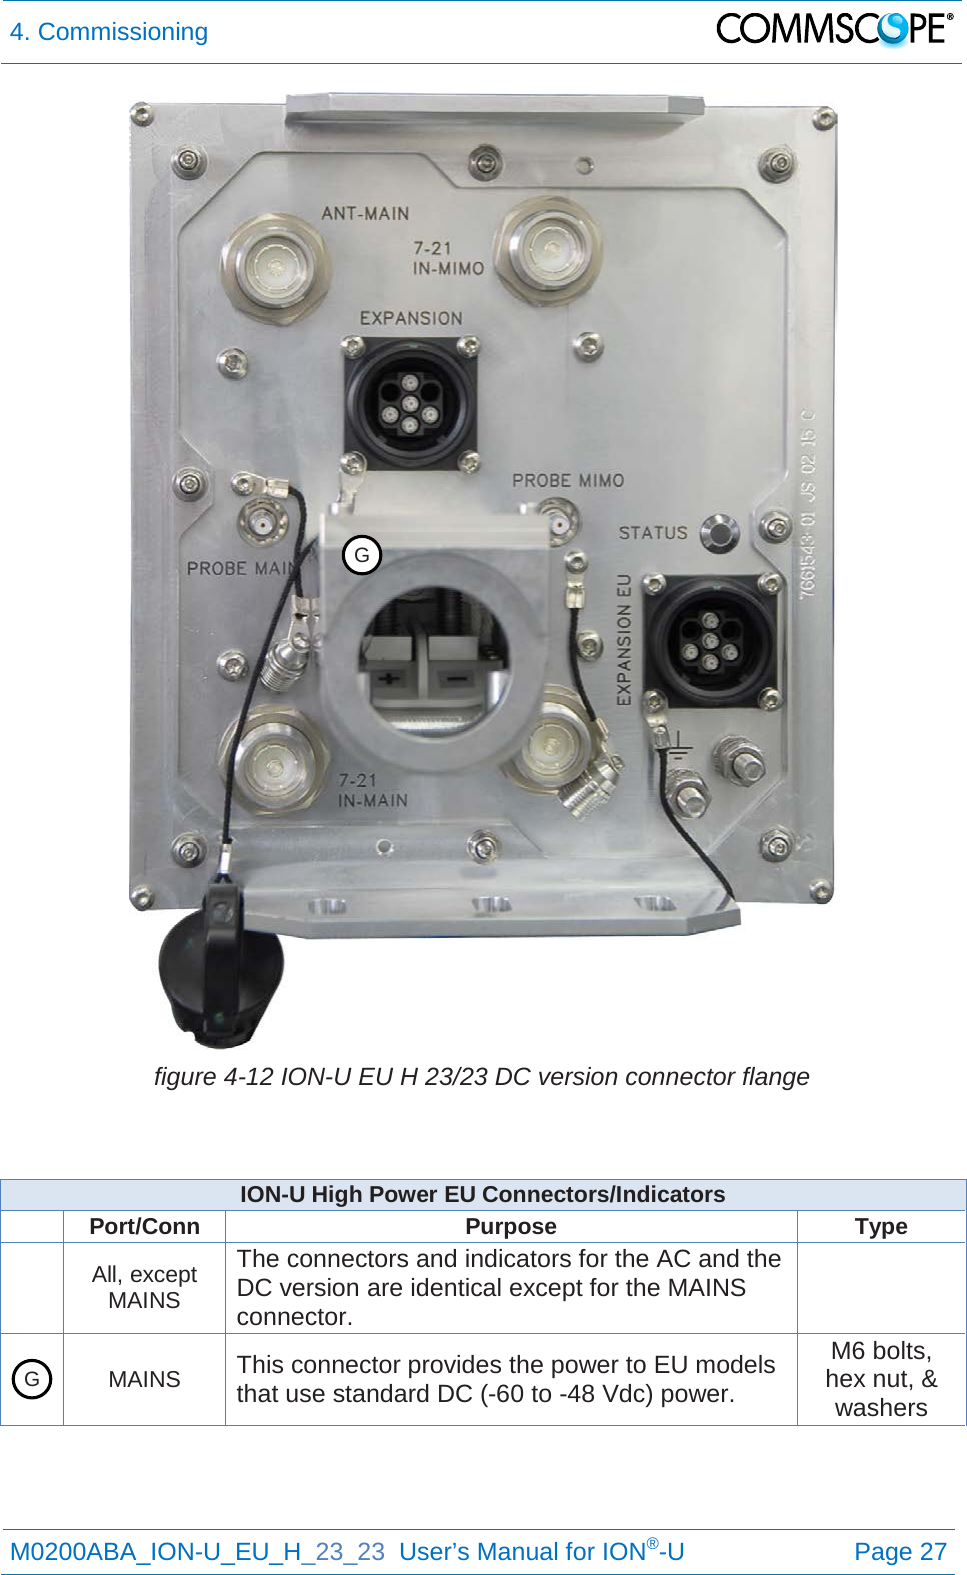 4. Commissioning   M0200ABA_ION-U_EU_H_23_23  User’s Manual for ION®-U  Page 27   figure 4-12 ION-U EU H 23/23 DC version connector flange   ION-U High Power EU Connectors/Indicators  Port/Conn Purpose Type  All, except MAINS The connectors and indicators for the AC and the DC version are identical except for the MAINS connector.   MAINS  This connector provides the power to EU models that use standard DC (-60 to -48 Vdc) power. M6 bolts, hex nut, &amp; washers    G G 